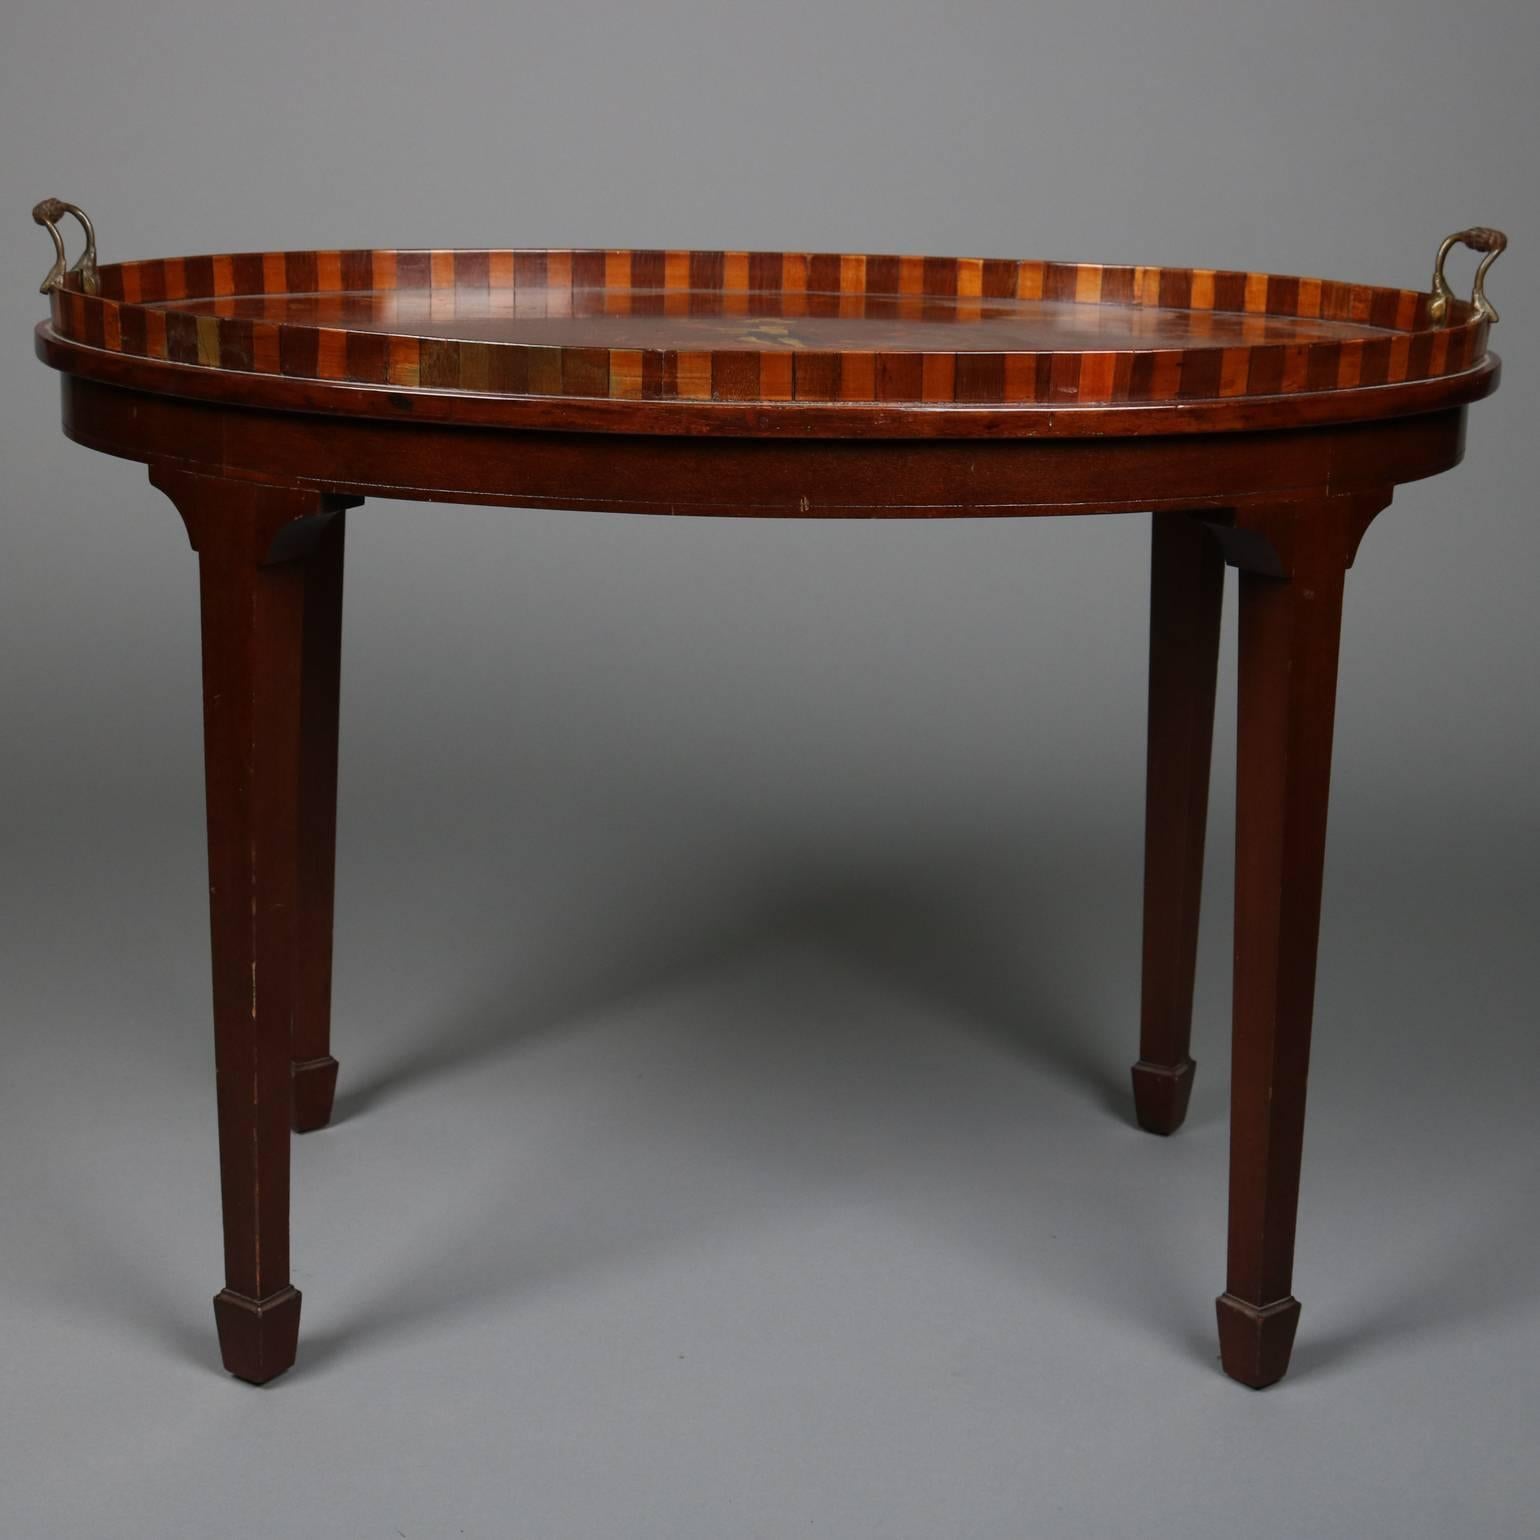 Antique Adam style mahogany tea table features double handle tray with neoclassical bone and satinwood inlaid central Greco-Roman figure atop dolphin with bordering figures and foliate inlay, tray lip with alternating two-toned segments, atop stand